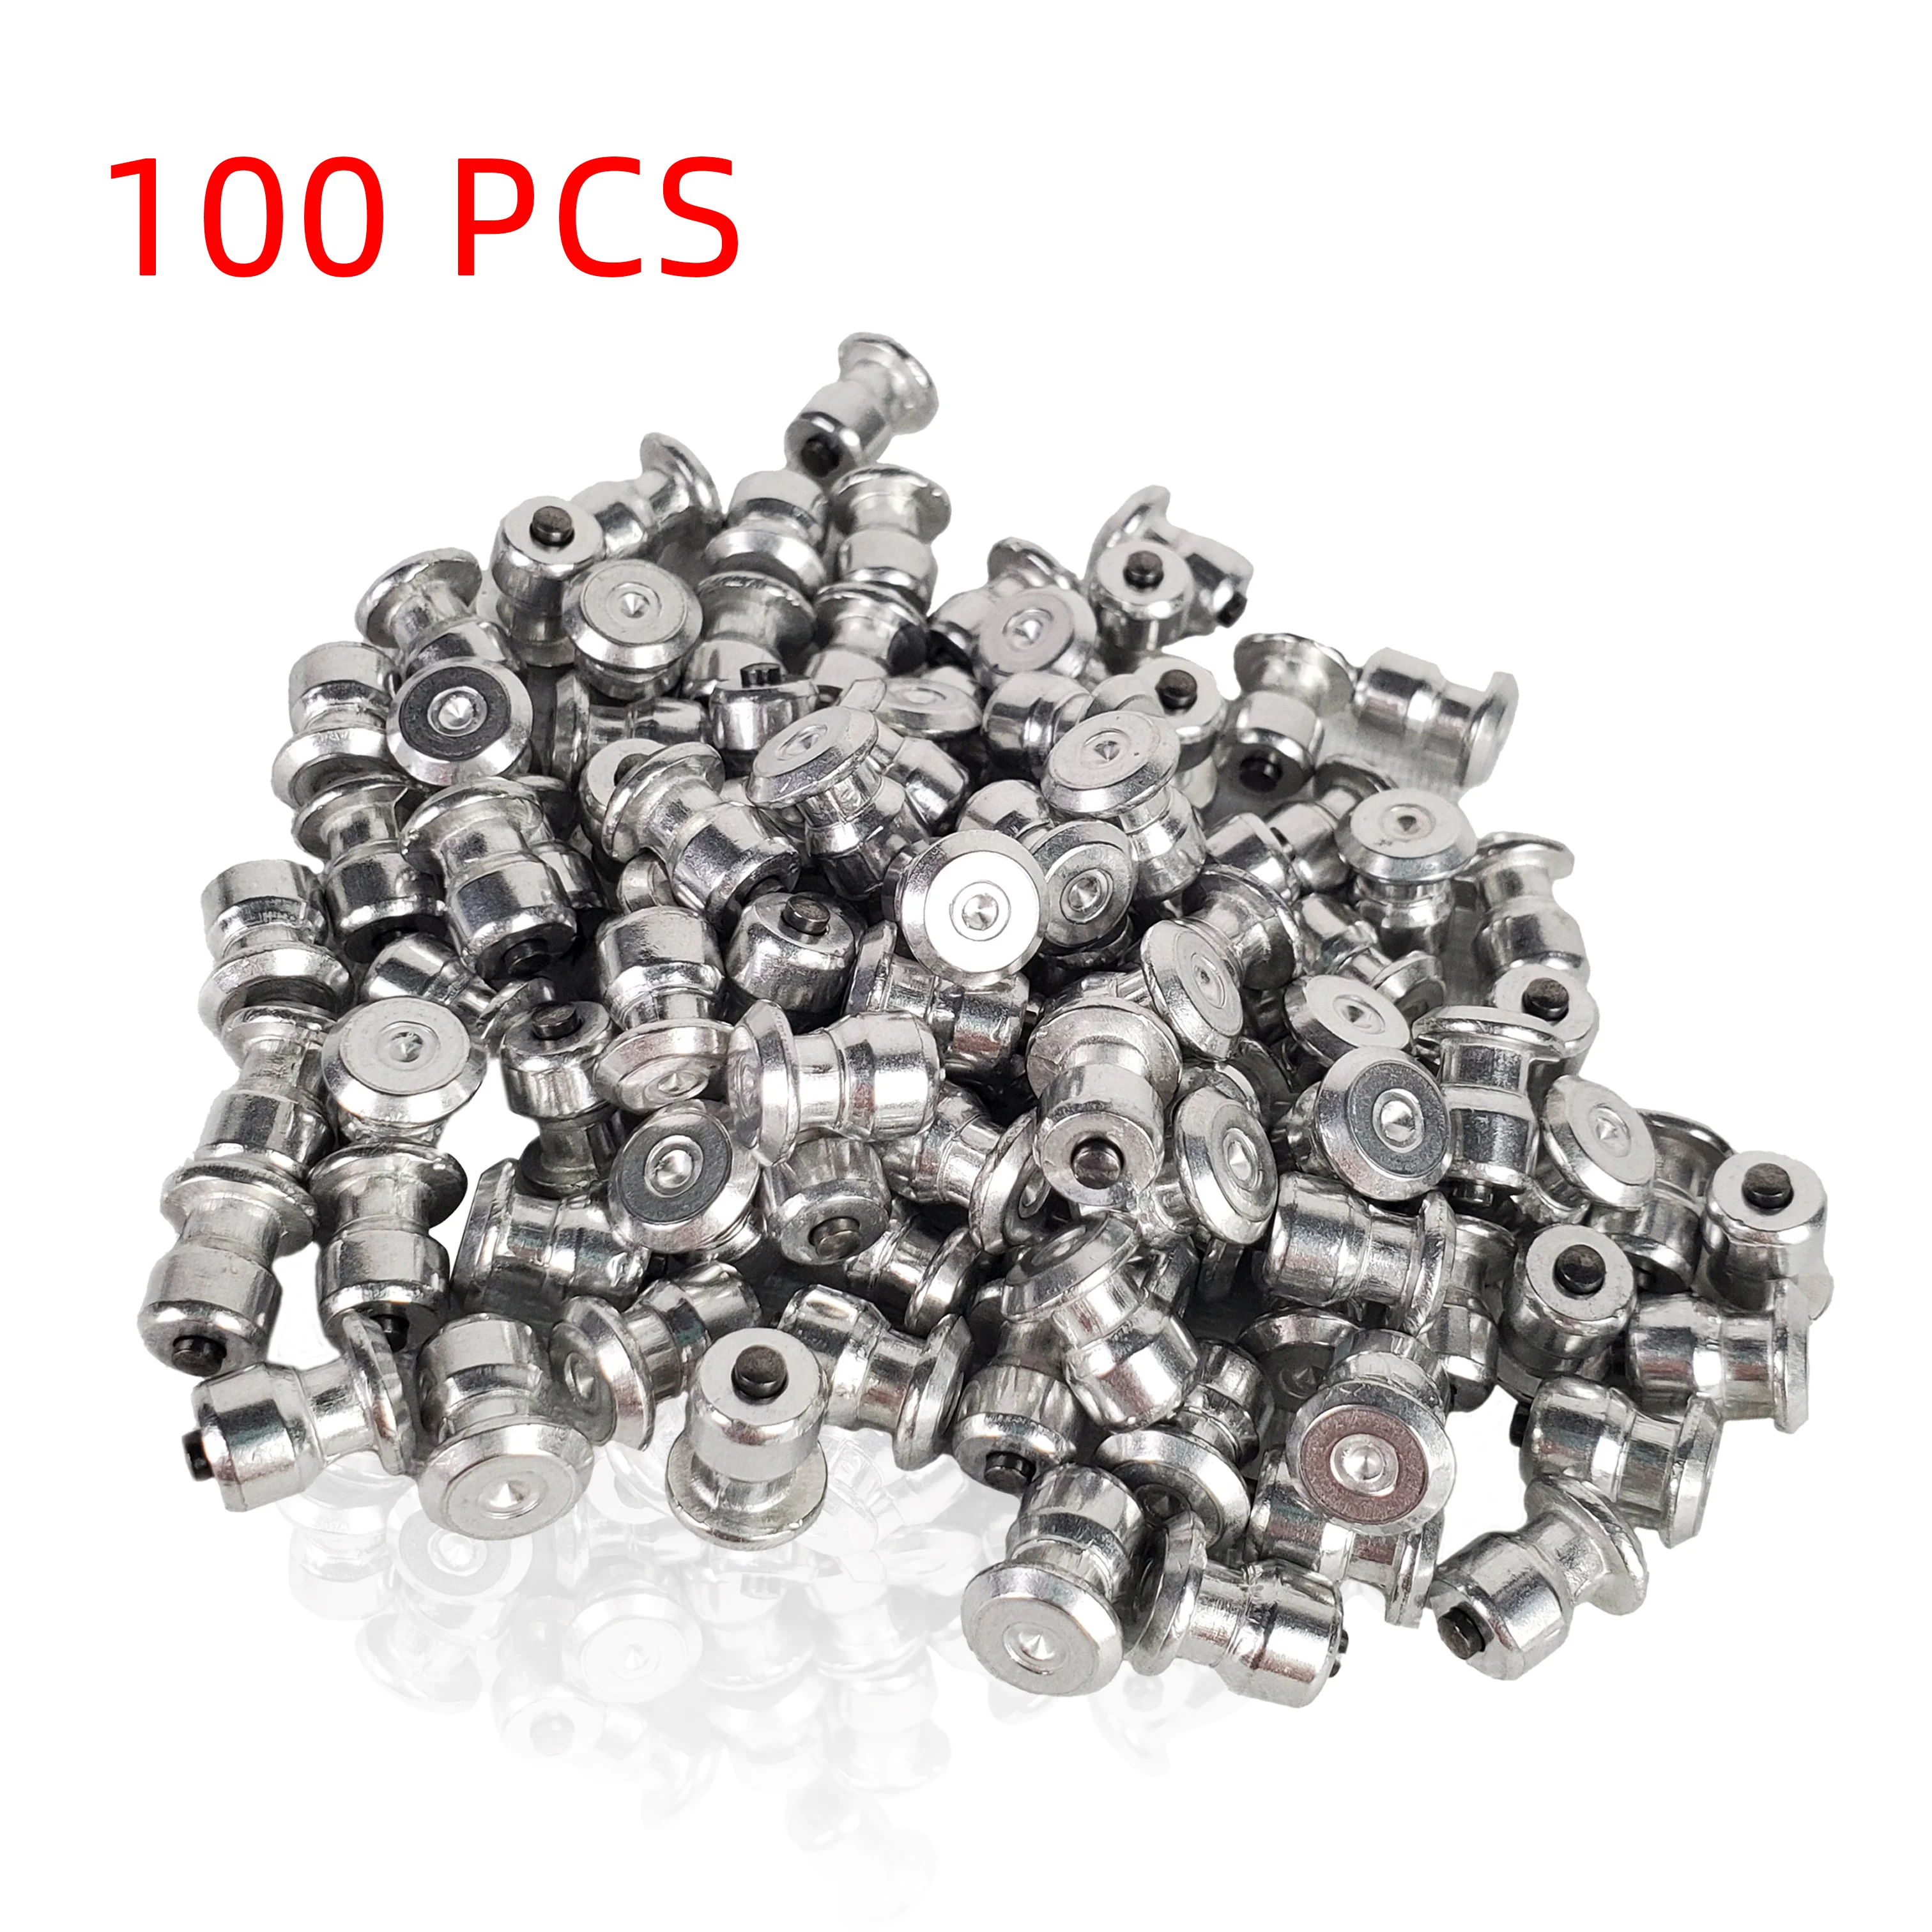 

100pcs Winter Wheel Lugs Car Tires Studs Screw Snow Spikes Wheel Tyre Snow Chains Studs For Shoes ATV Car Motorcycle Tire 8x10mm